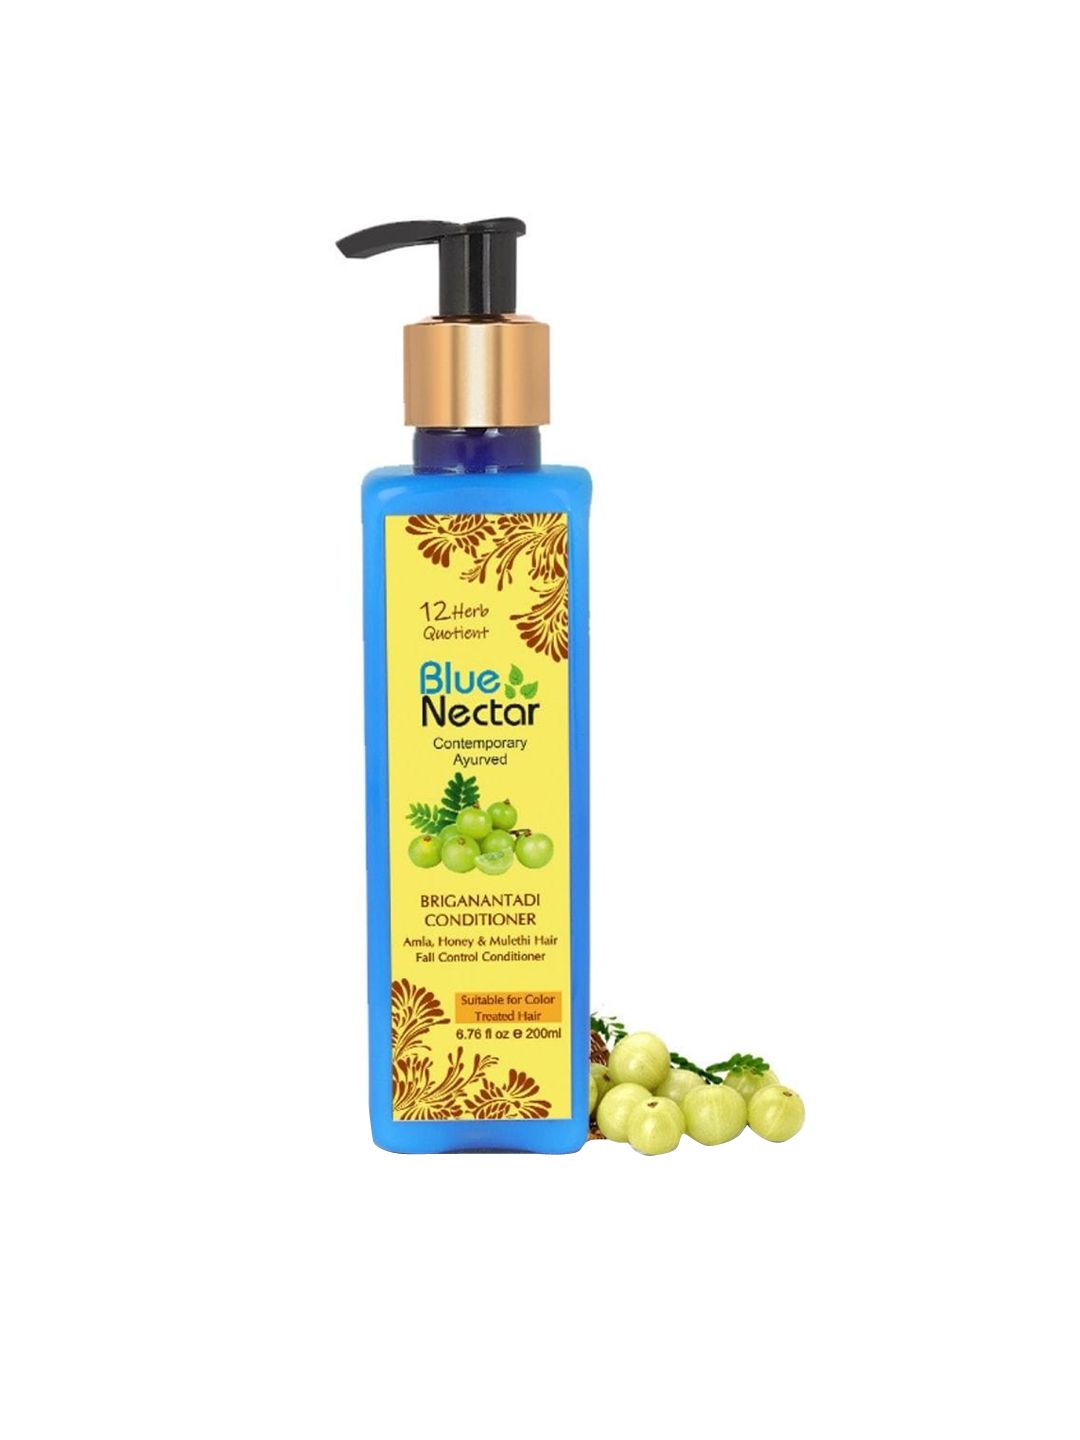 Blue Nectar Hair Fall Control Conditioner with Amla, Honey & Mulethi 200ml Price in India